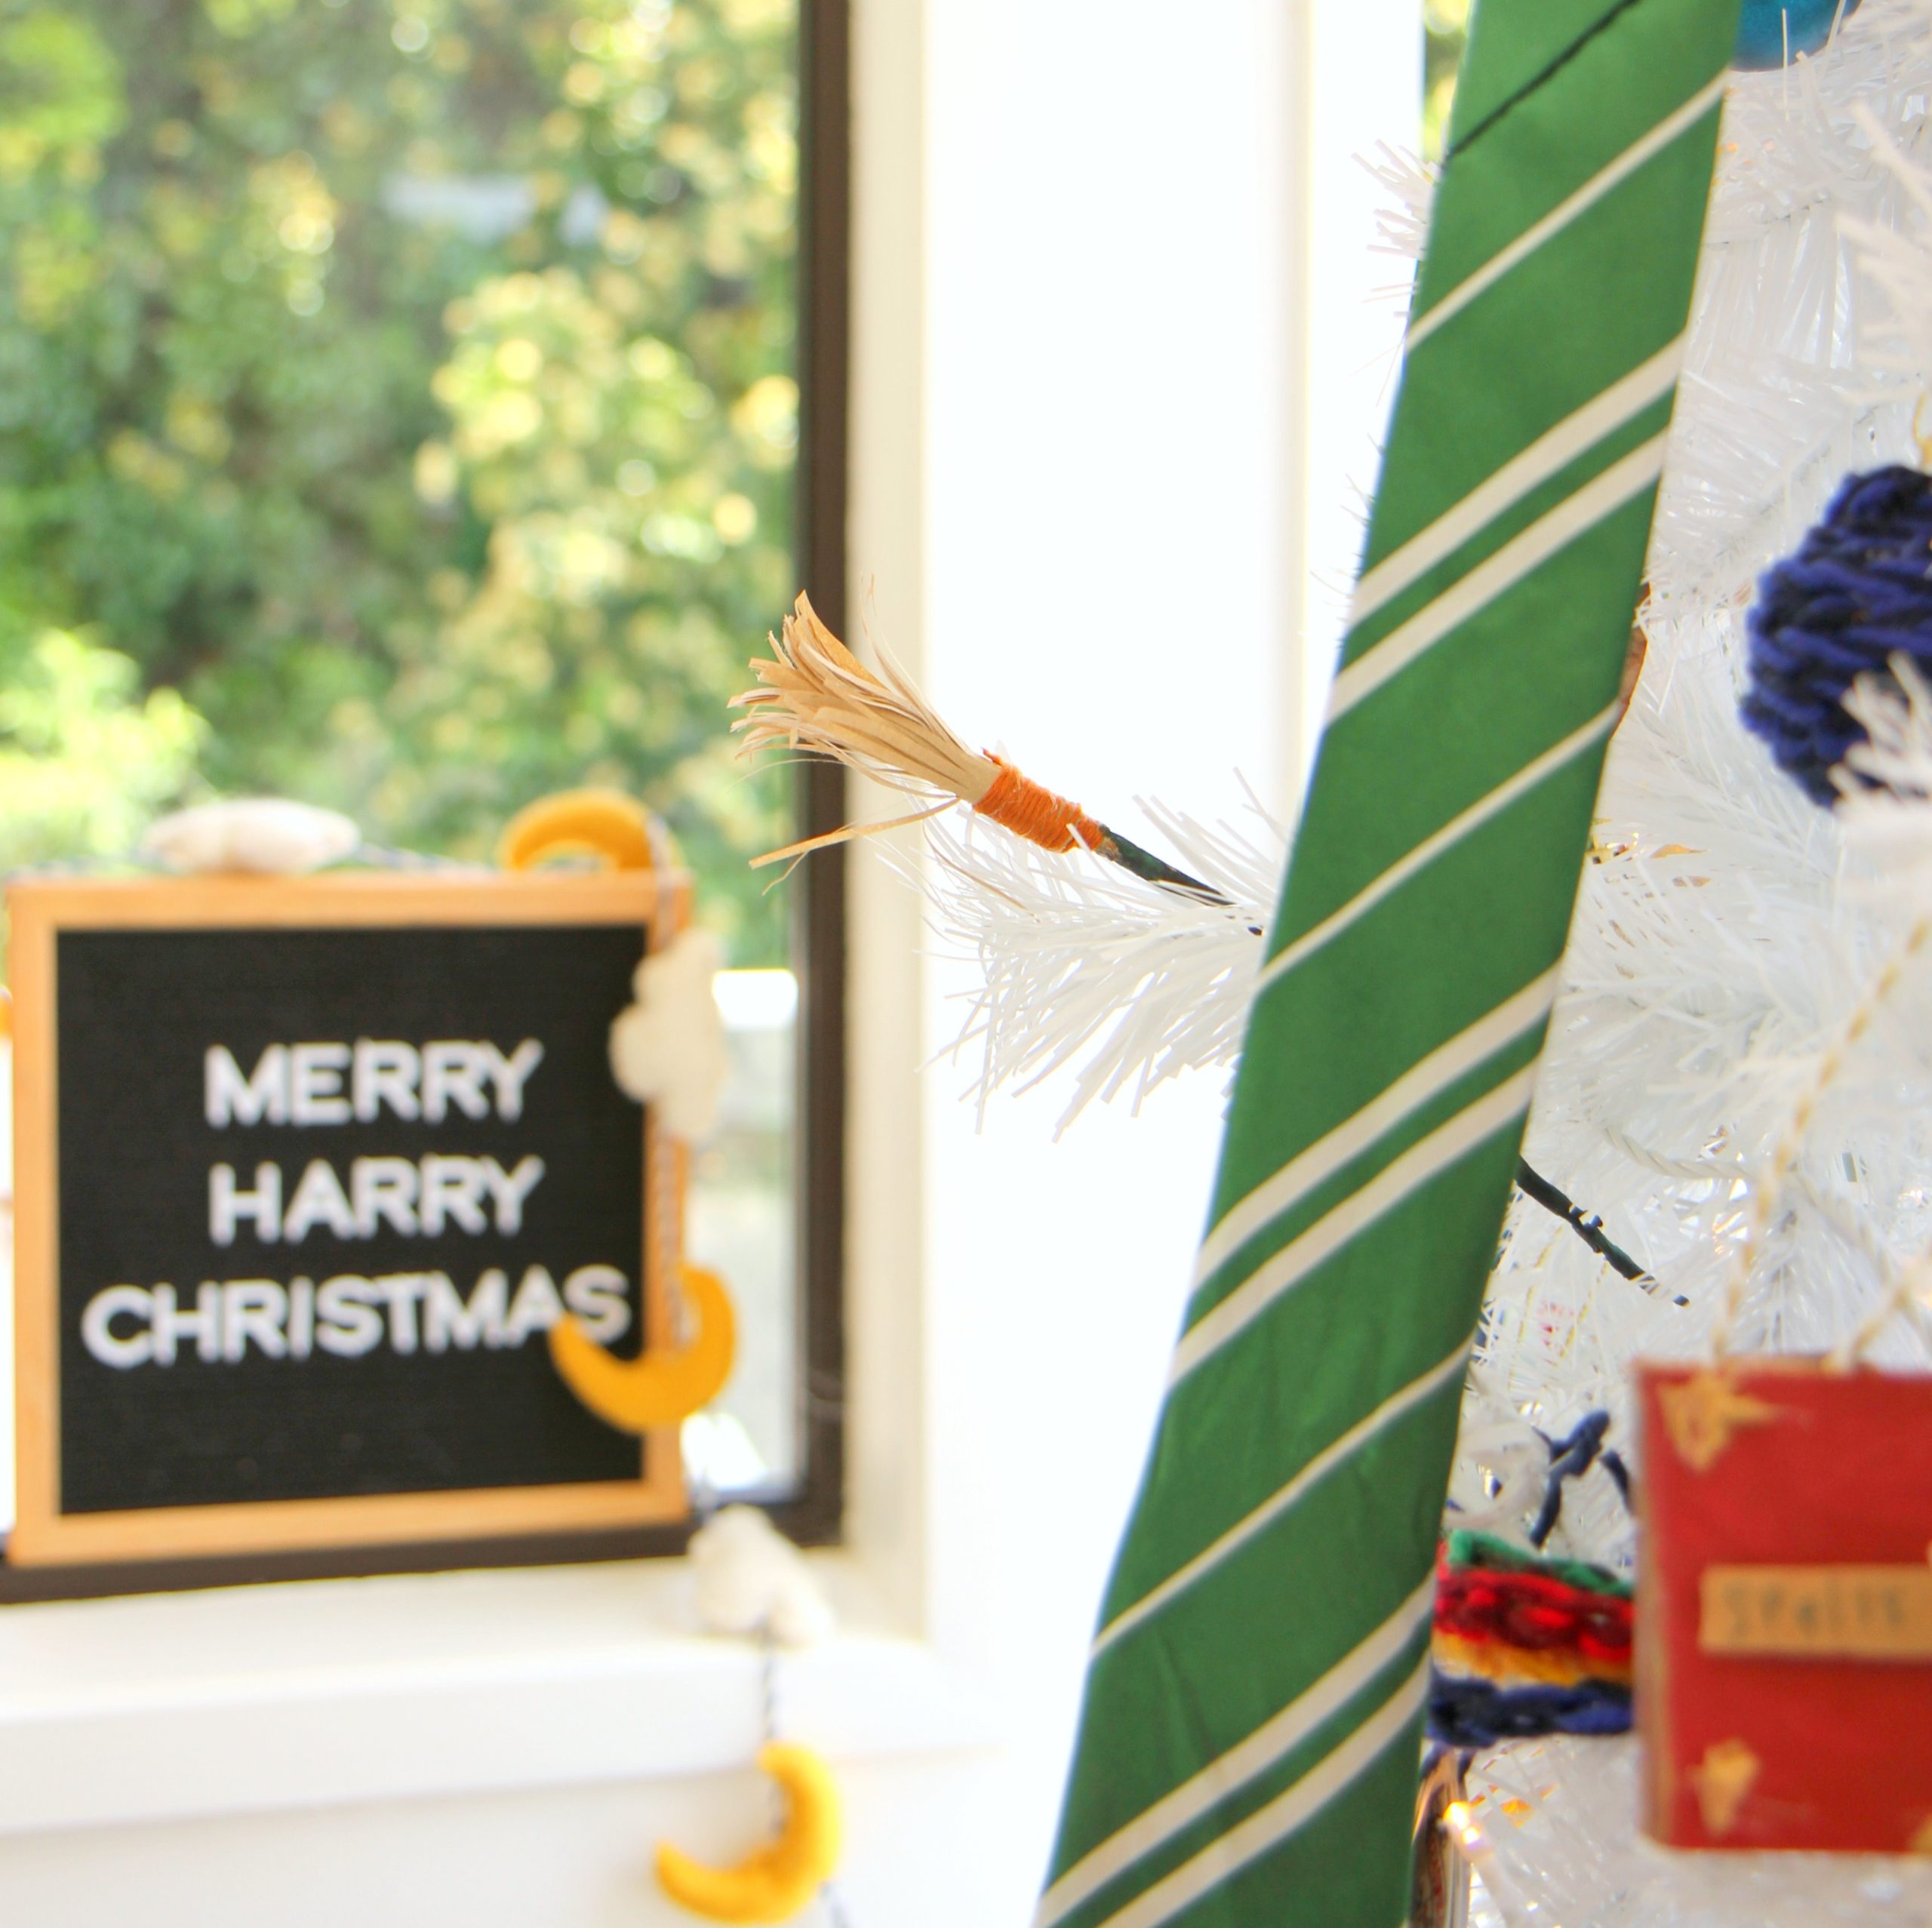 DIY ornaments for a Harry Potter Christmas tree